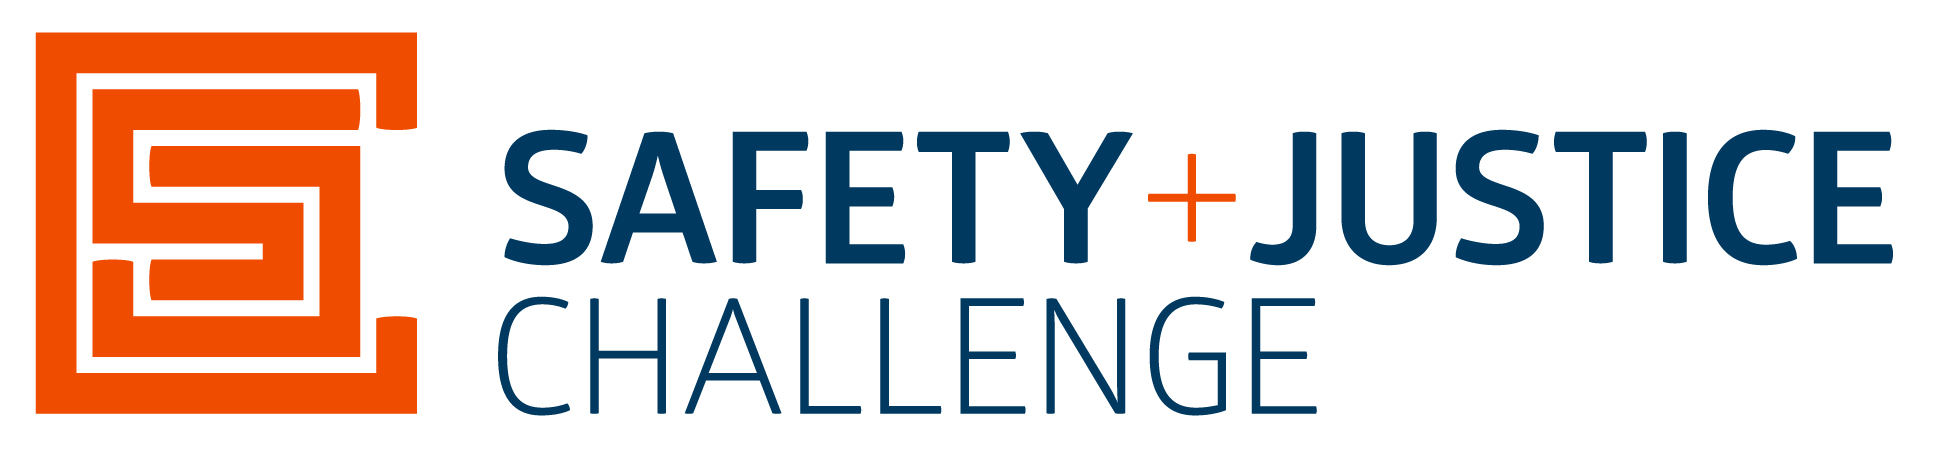 Safety & Justice Challenge project logo